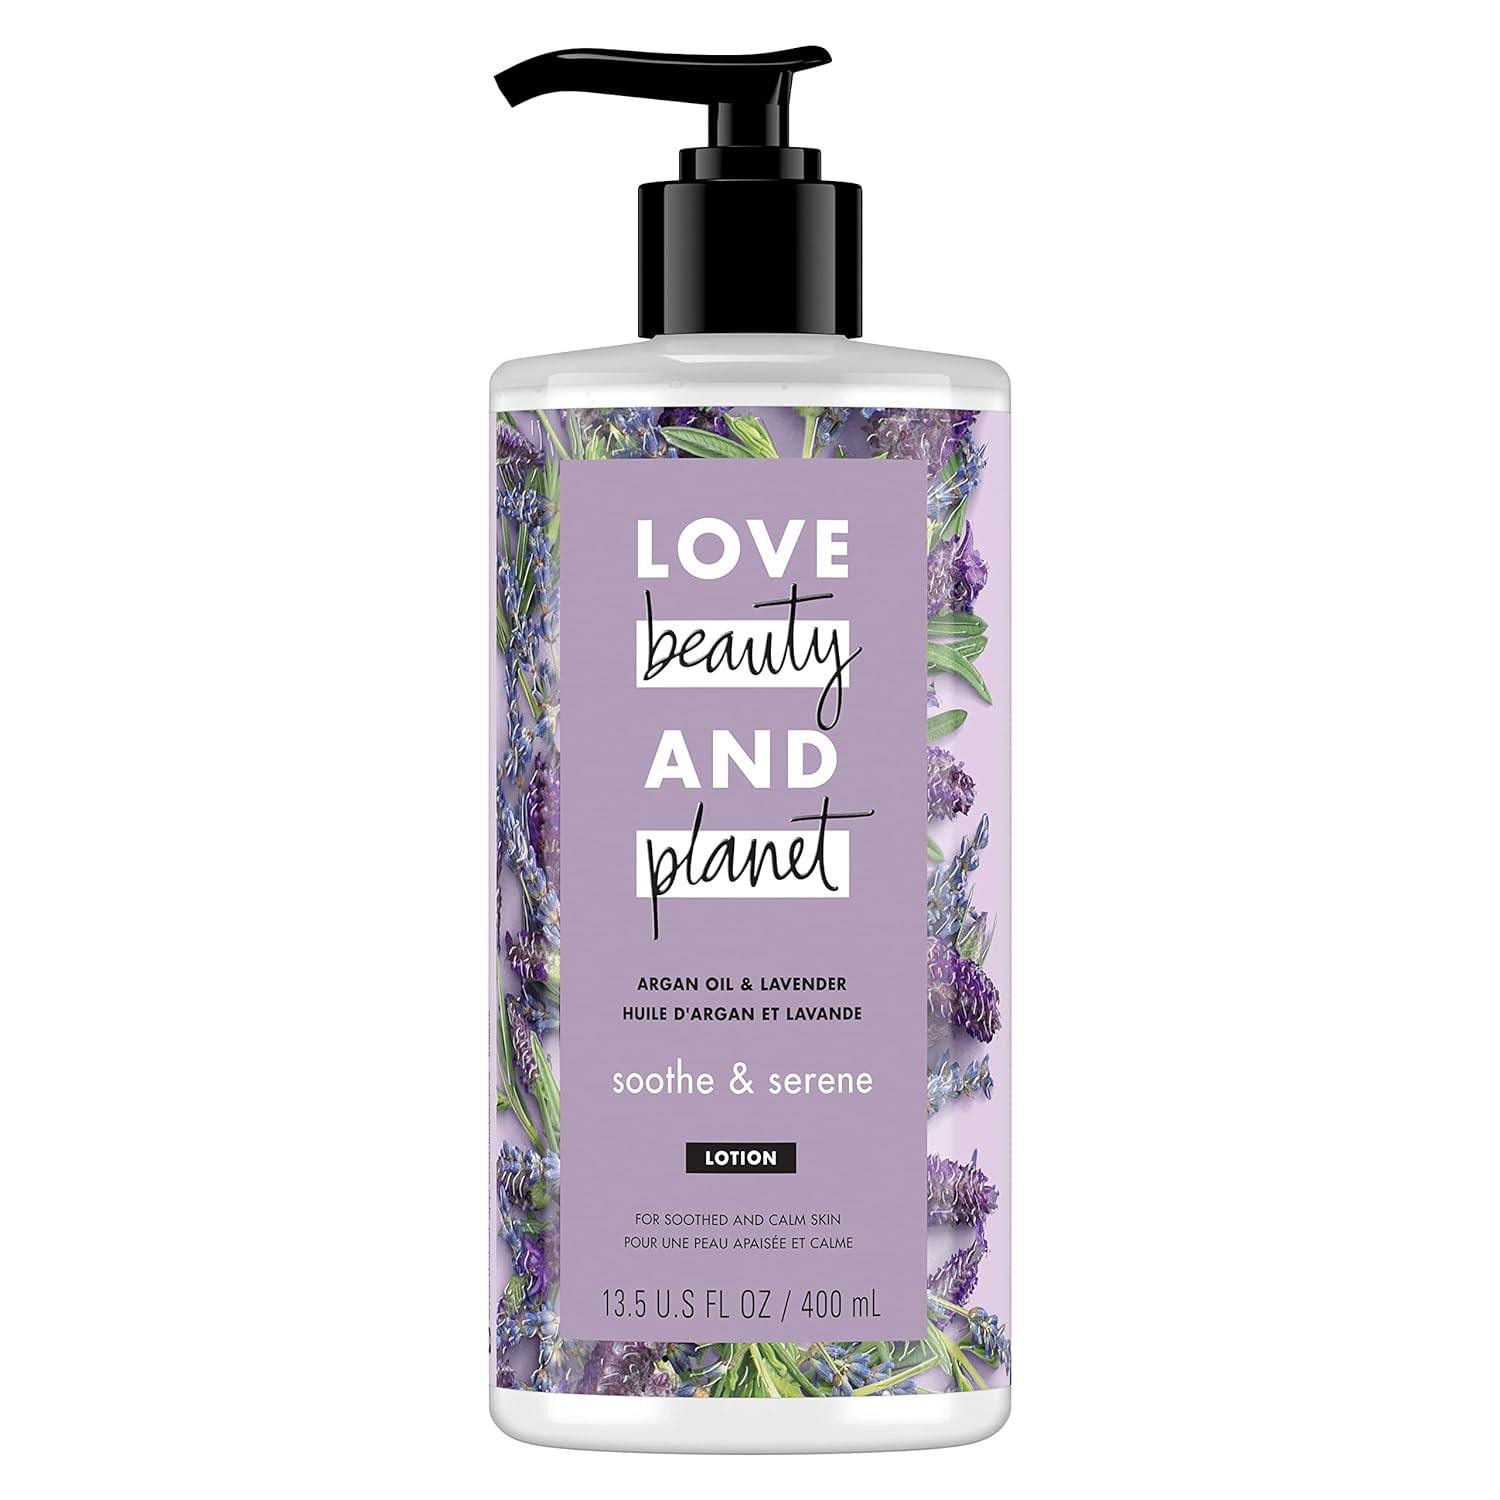 Love Beauty and Planet Soothe  Serene Body Lotion for Soothed Skin Argan Oil  Lavender Natural Ingredients, Plant-Based Moisturizers, Vegan, Cruelty-Free 13.5 oz